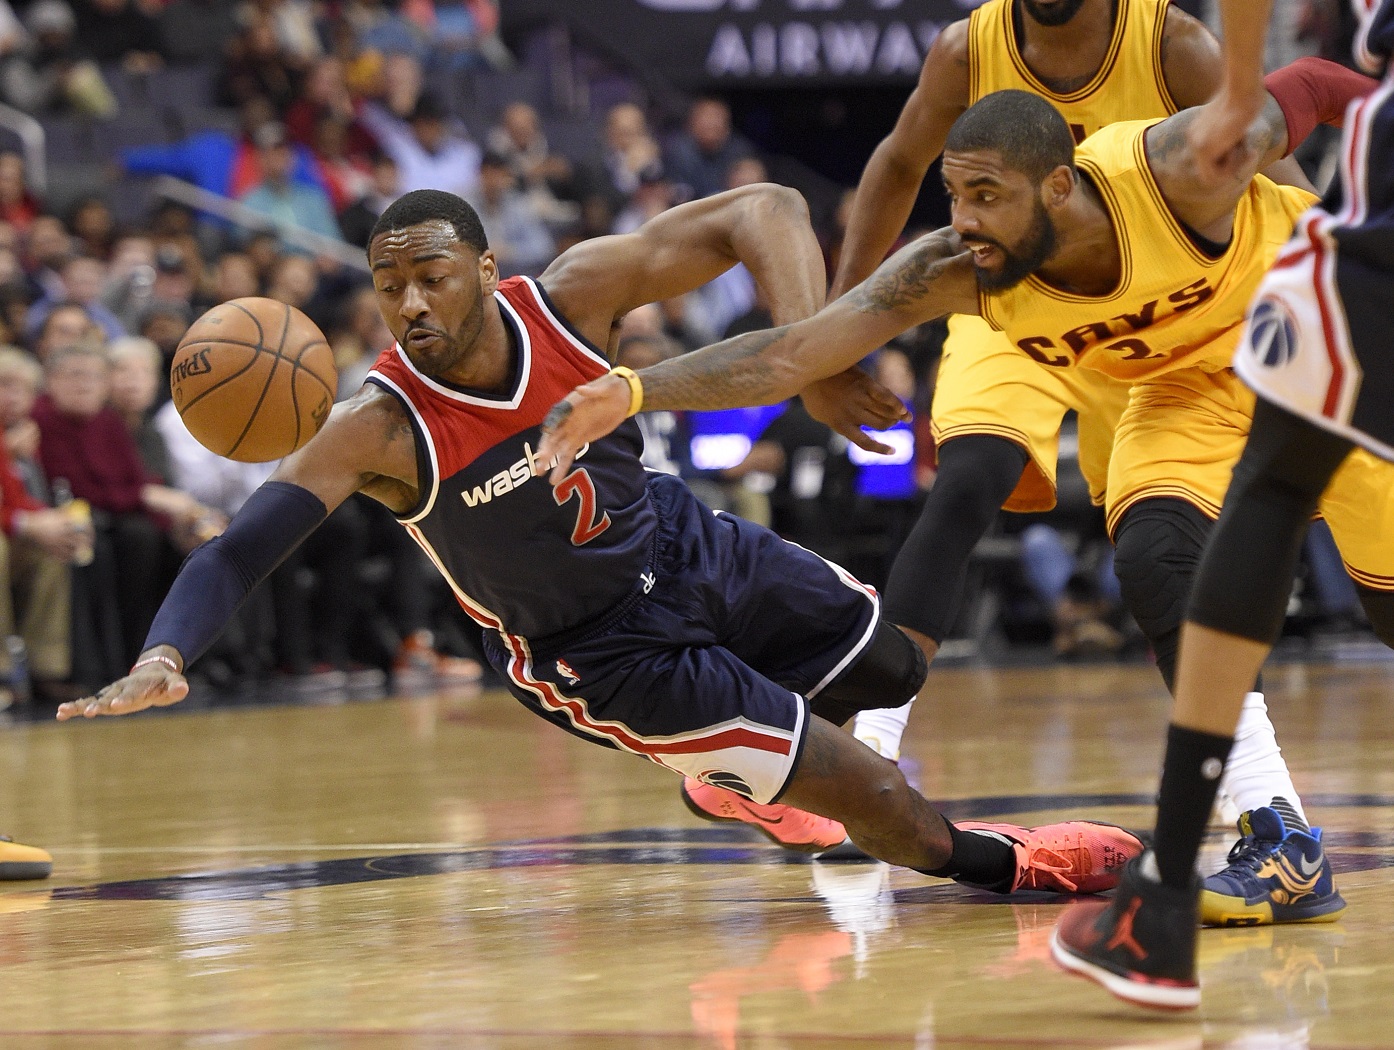 By the Numbers: Wizards winning streak hits 5 with win against the